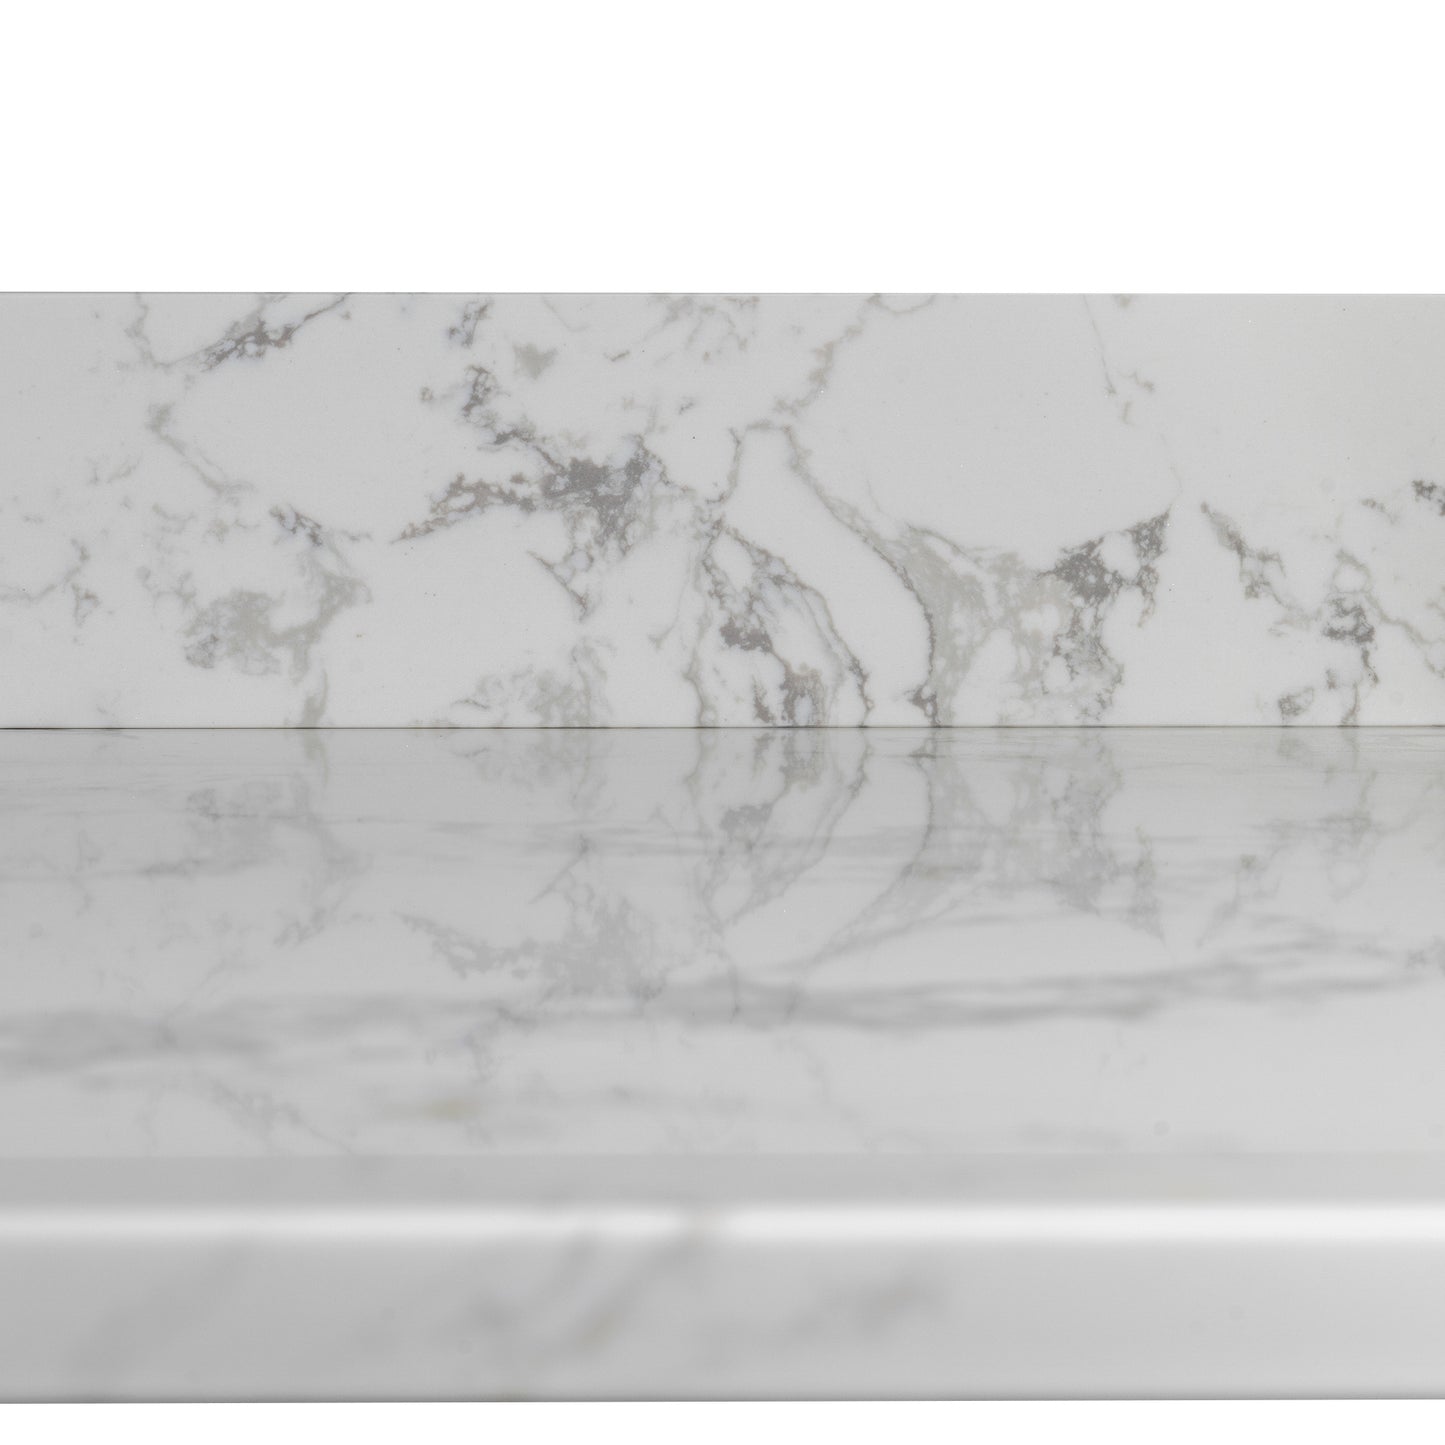 Montary 43‘’x22" bathroom stone vanity top  engineered stone carrara white marble color with rectangle undermount ceramic sink and  single faucet hole with back splash .